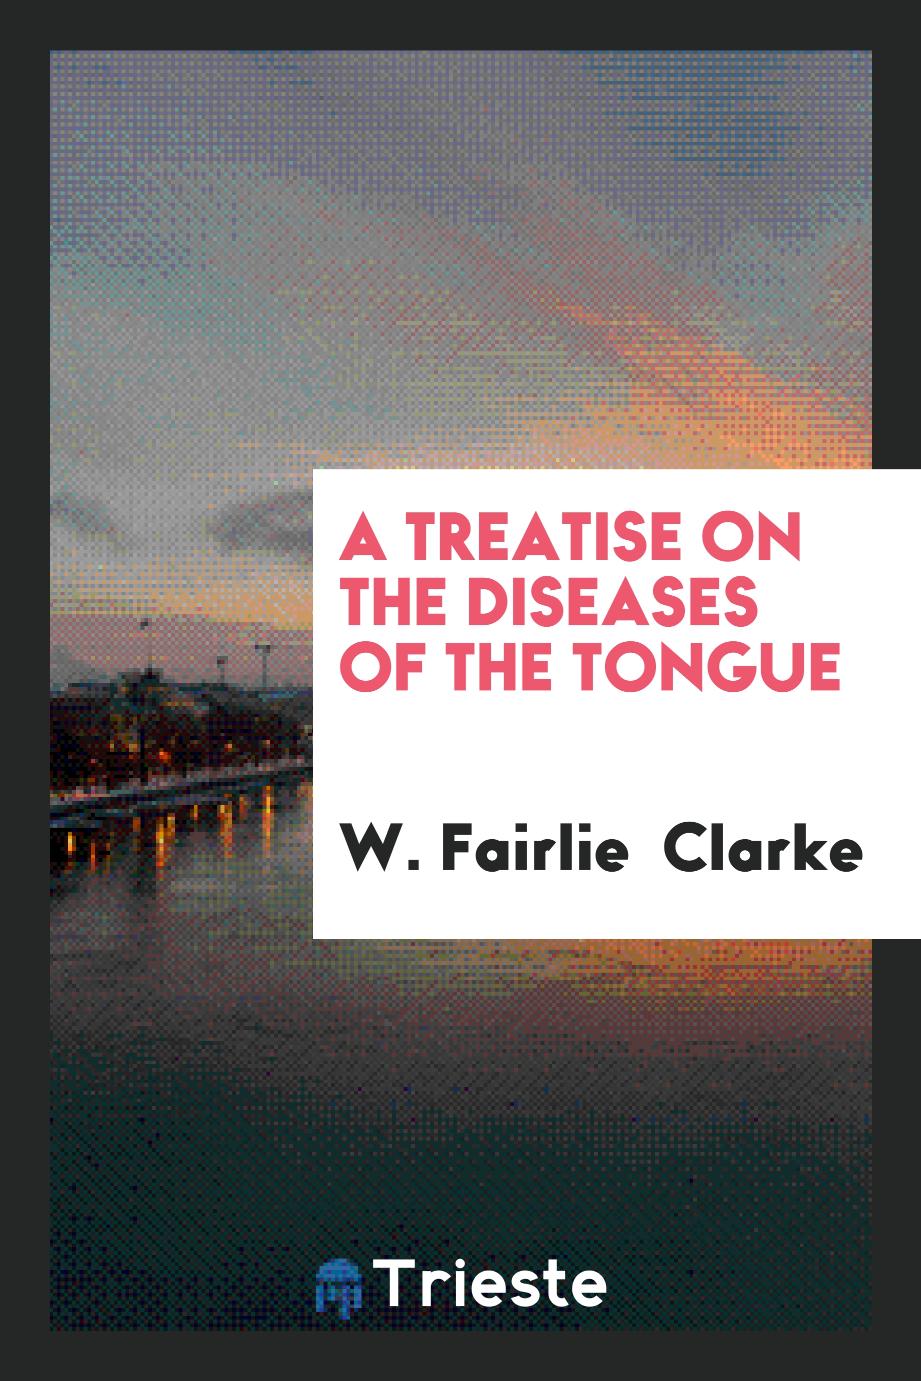 A Treatise on the Diseases of the Tongue